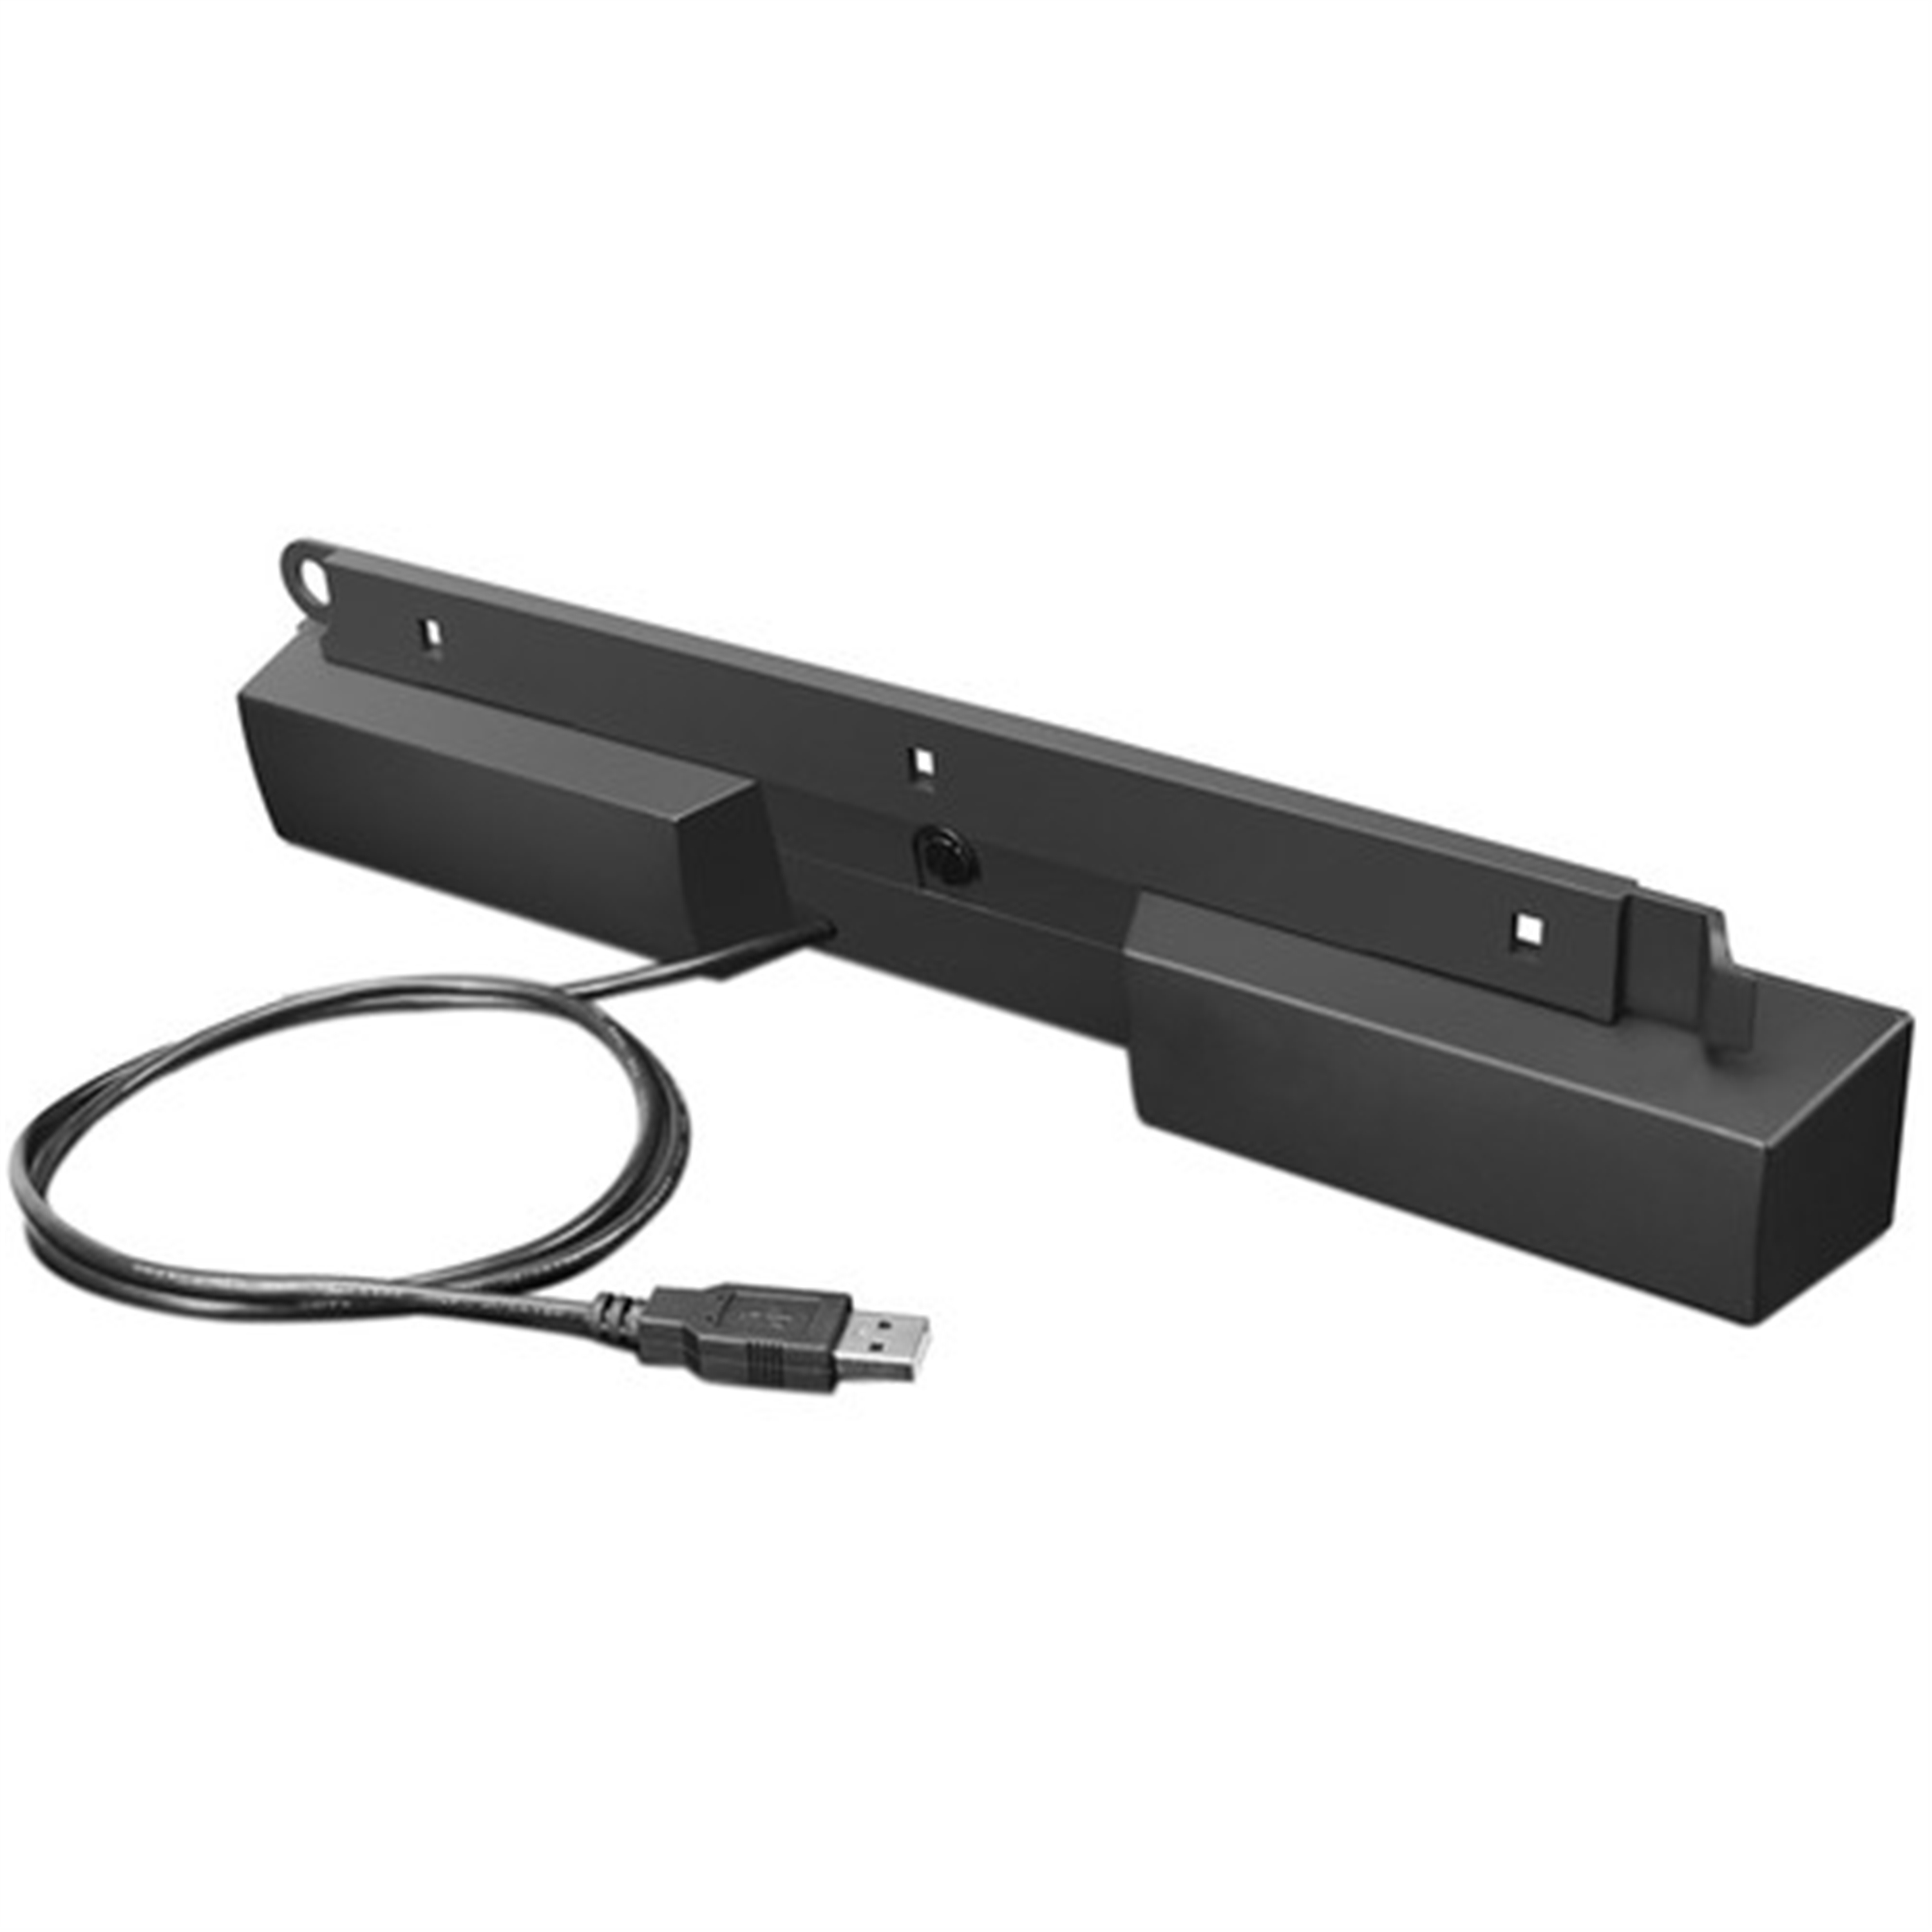 Lenovo 0A36190 2.0 Channel Home Theater Sound Bar, Black (Scratch And Dent Used) - image 3 of 3